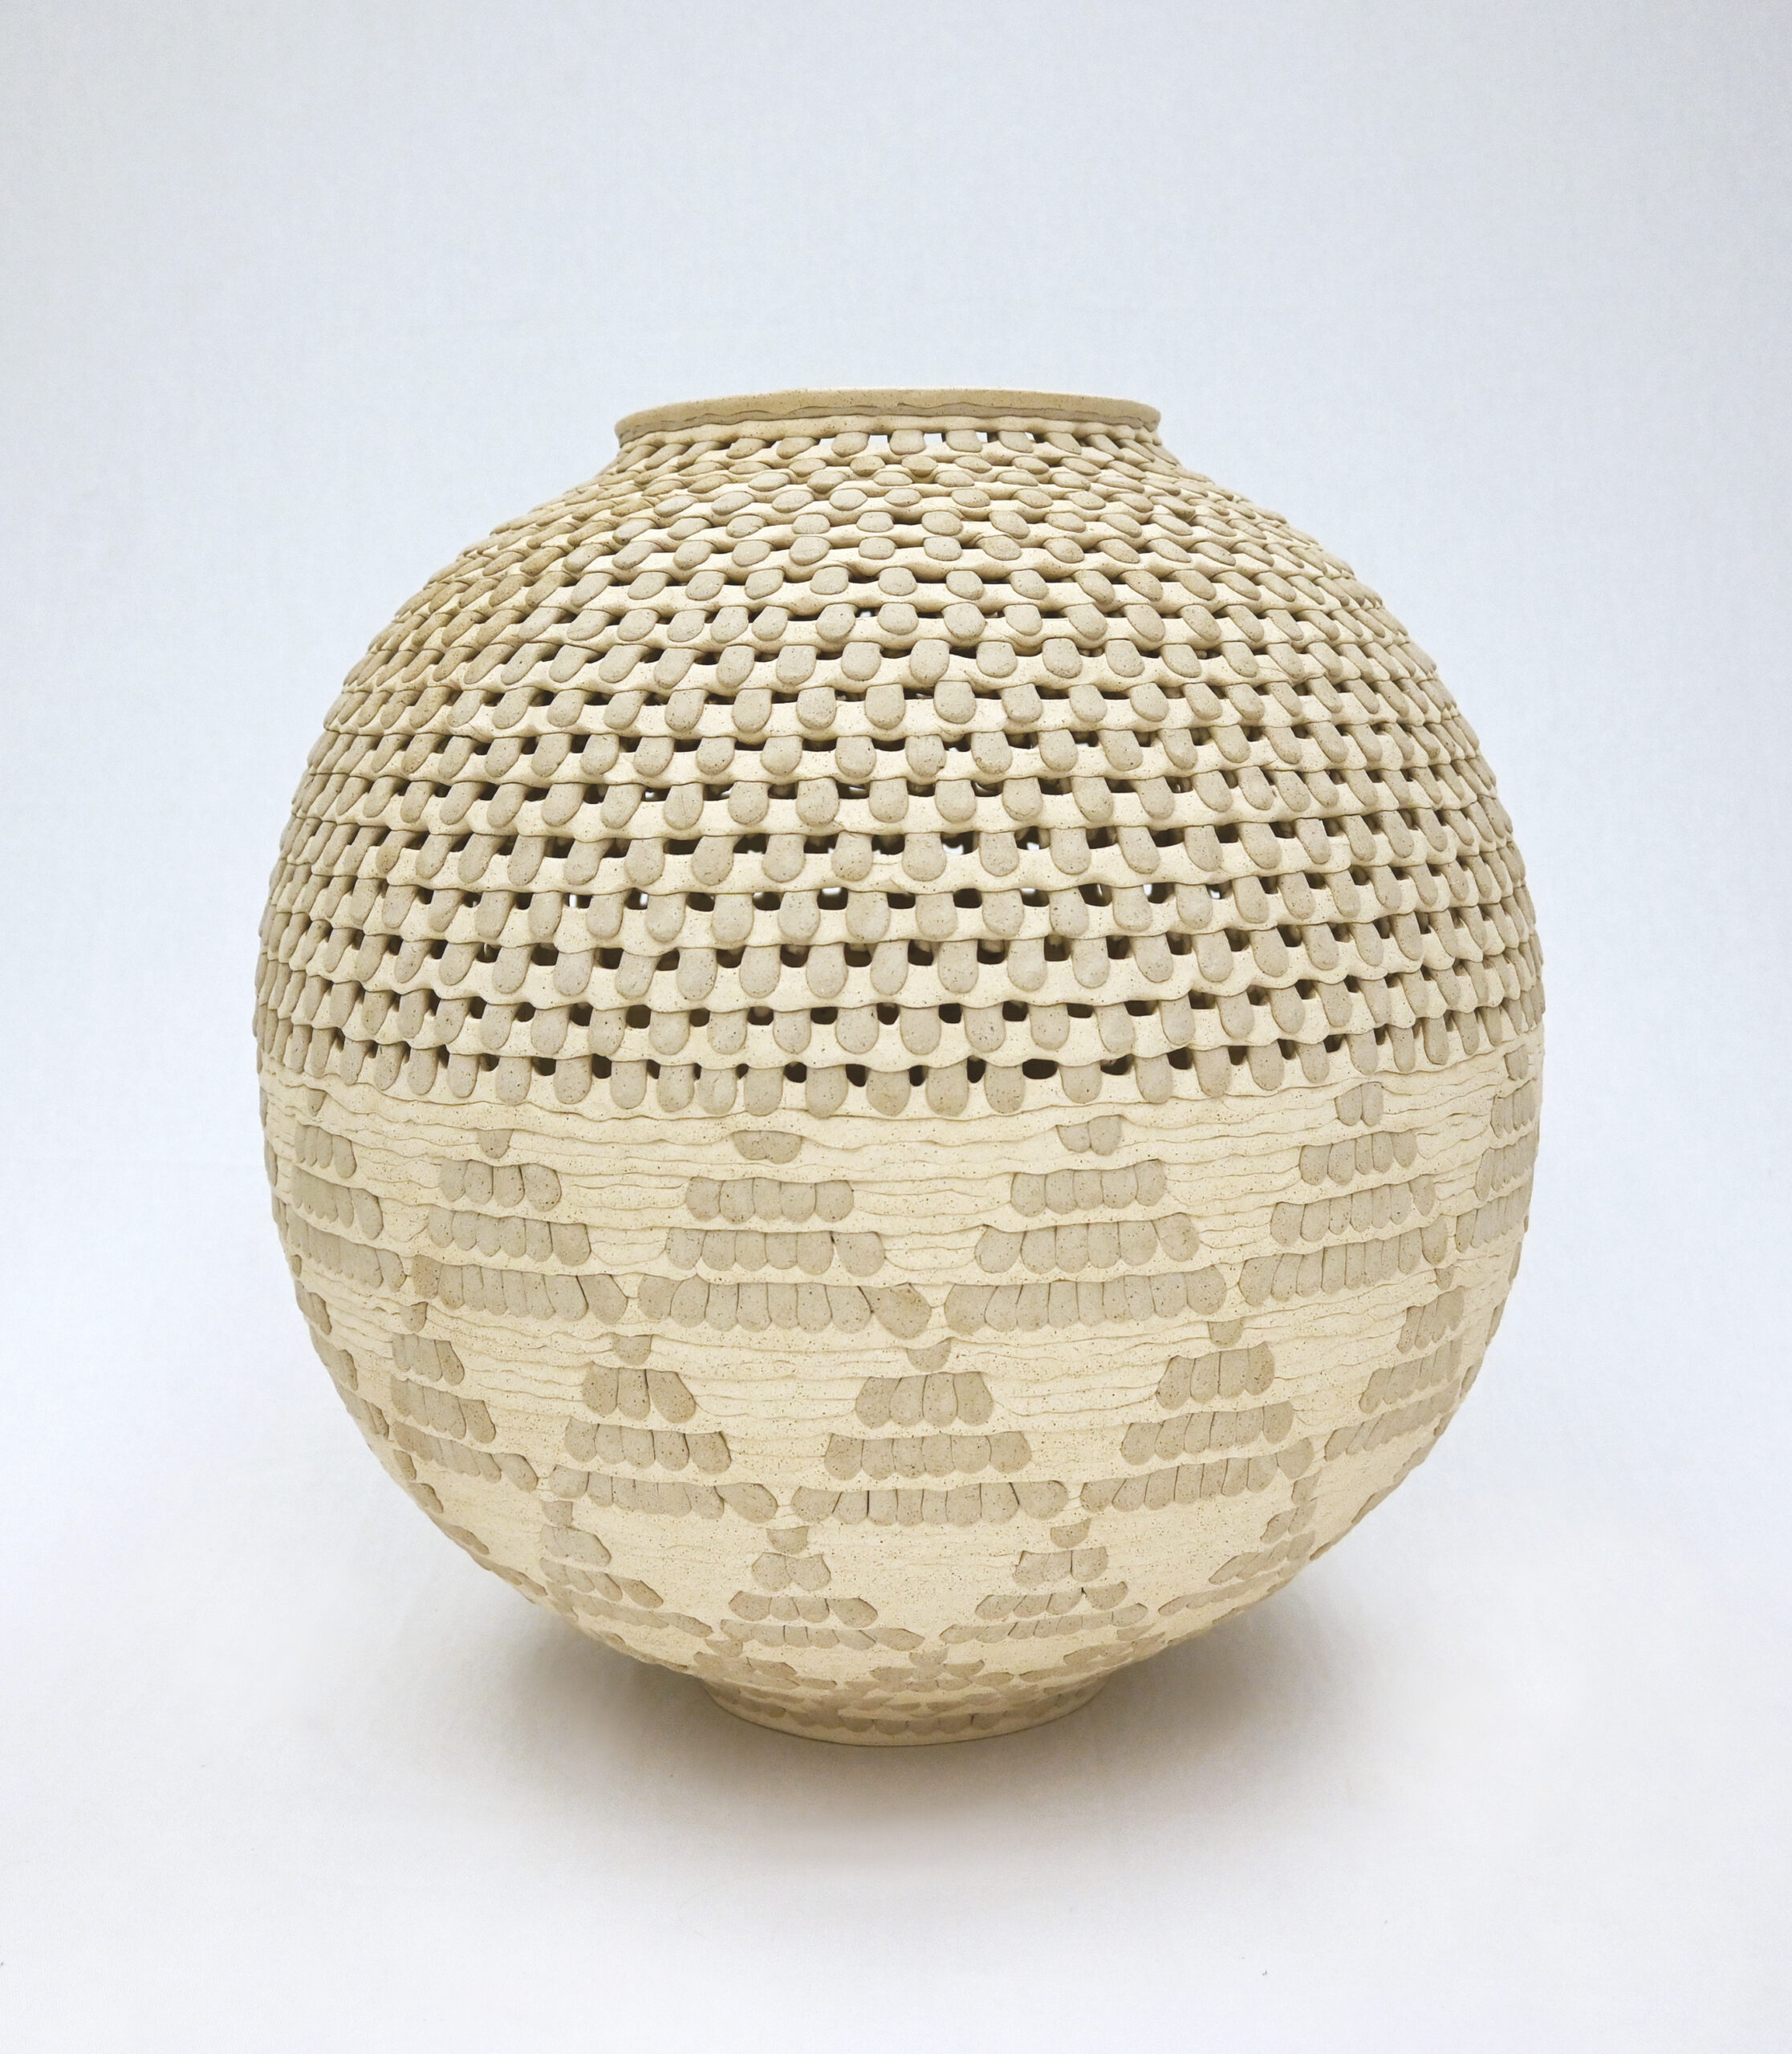 
							

									YoonJee Kwak									Patterned Memories, Moon-jar inspired vessel II 2024									Hand-built stoneware, colored stoneware<br />
18 3/4 x 18 1/2 x 18 1/2 inches									


							